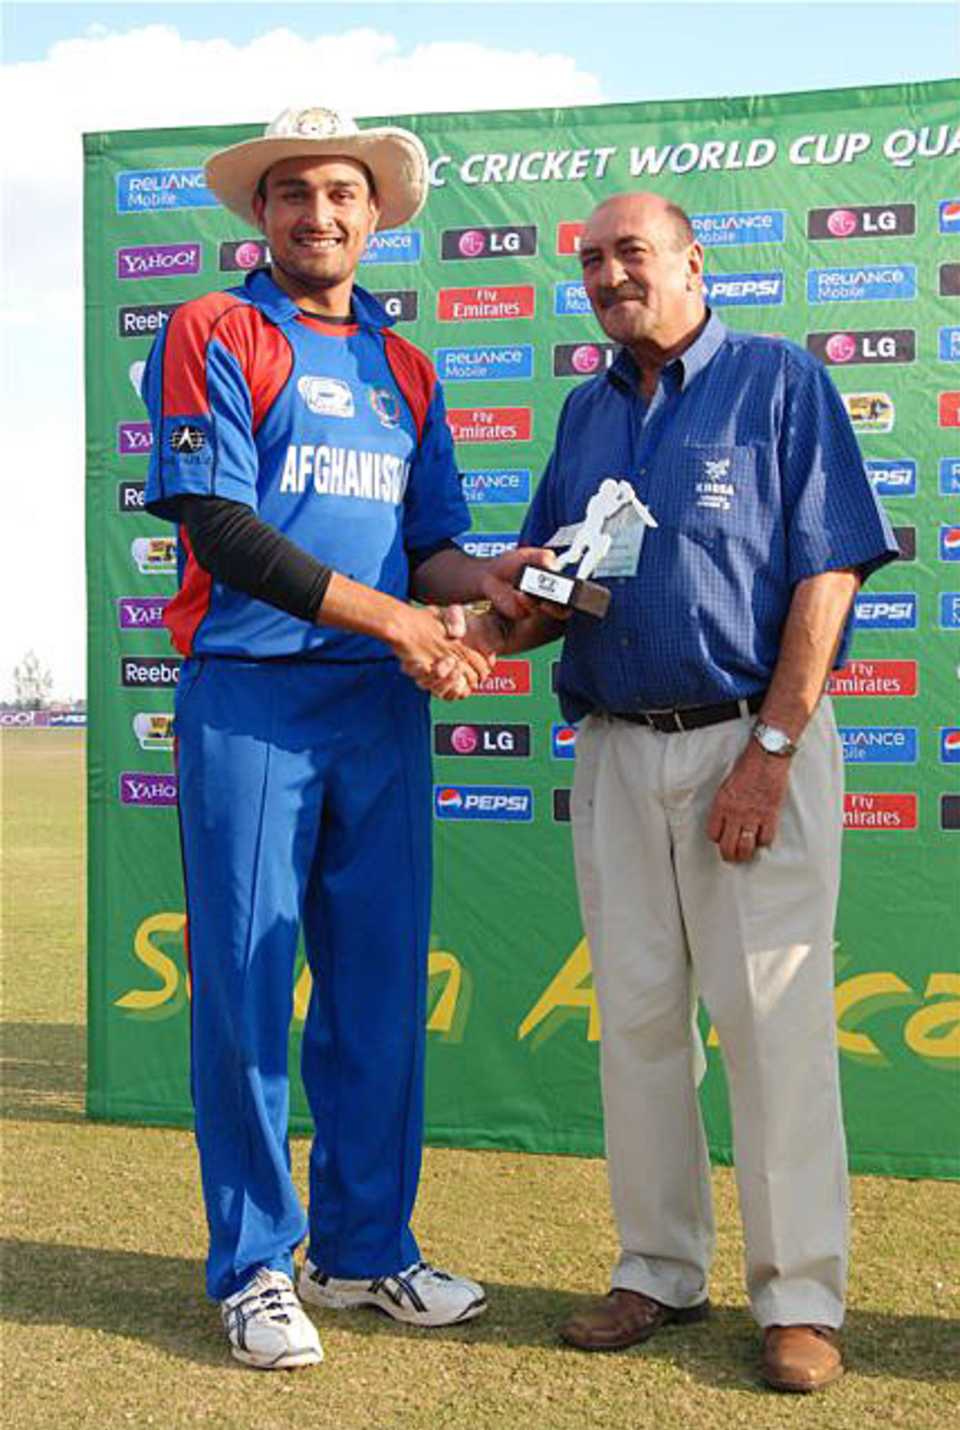 Hamid Hassan was the Man of the Match for his five wickets